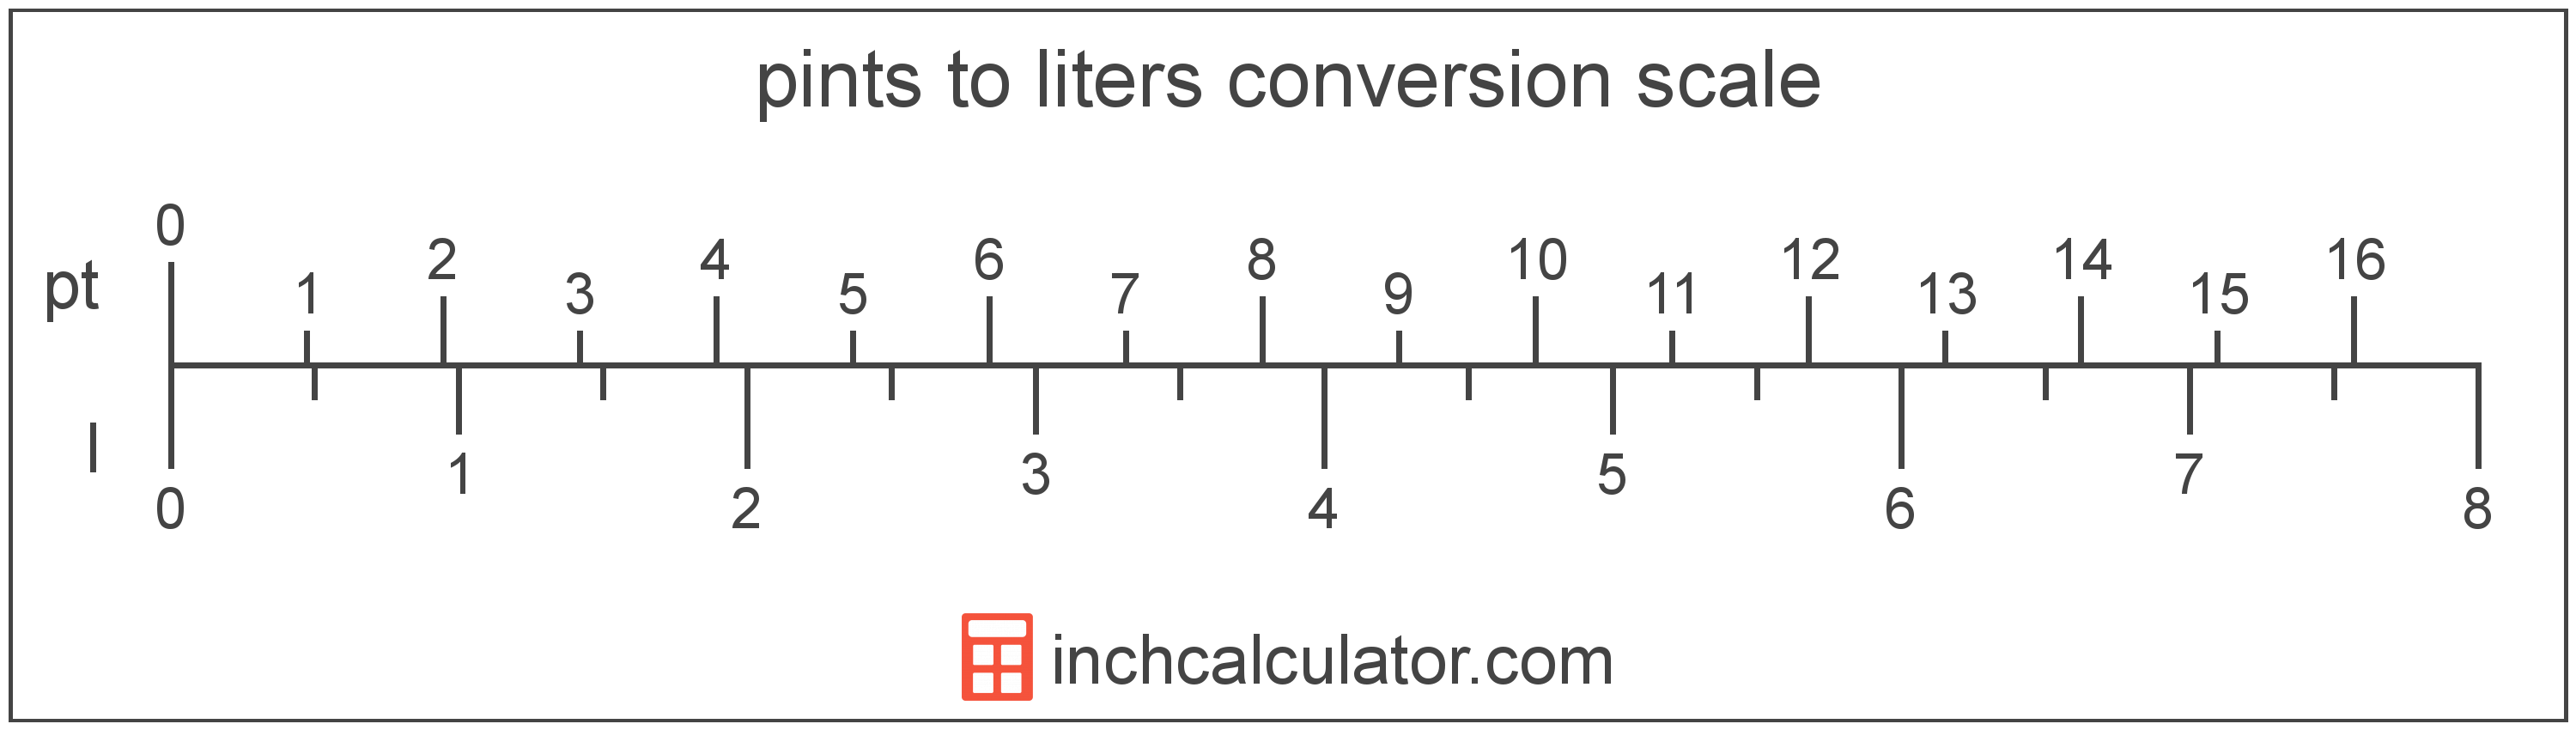 Pints to Liters Conversion (pt to L) - Inch Calculator